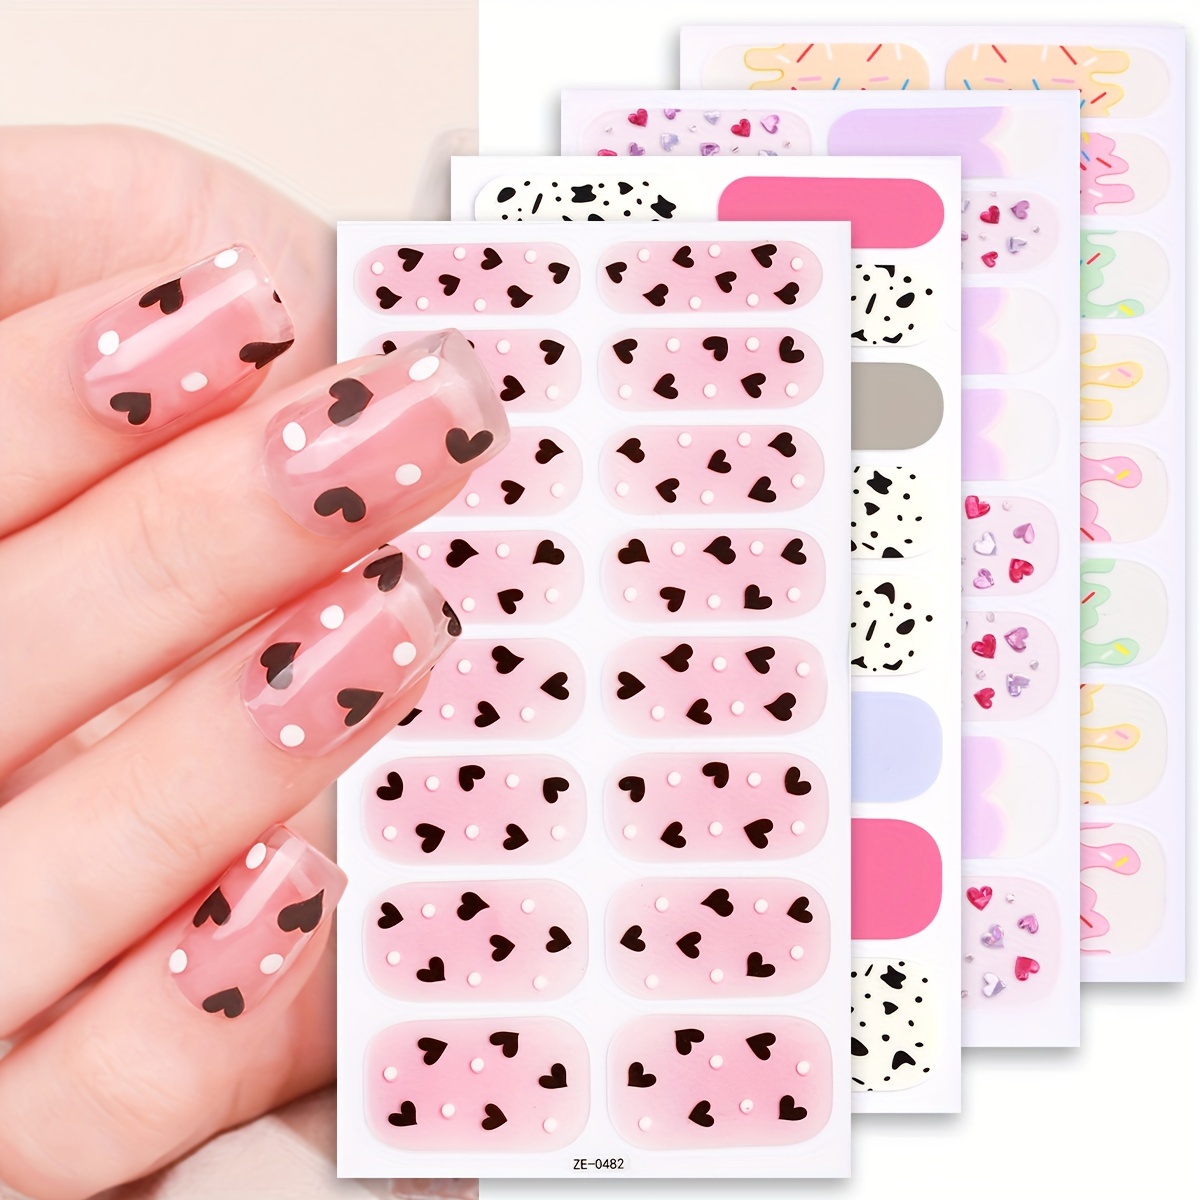 

Spring & Summer Polka Dot Nail Strips - 4 Sheets Of Self-adhesive Full Wraps With Glitter Finish, Includes Nail File, Easy Apply For Women And Girls